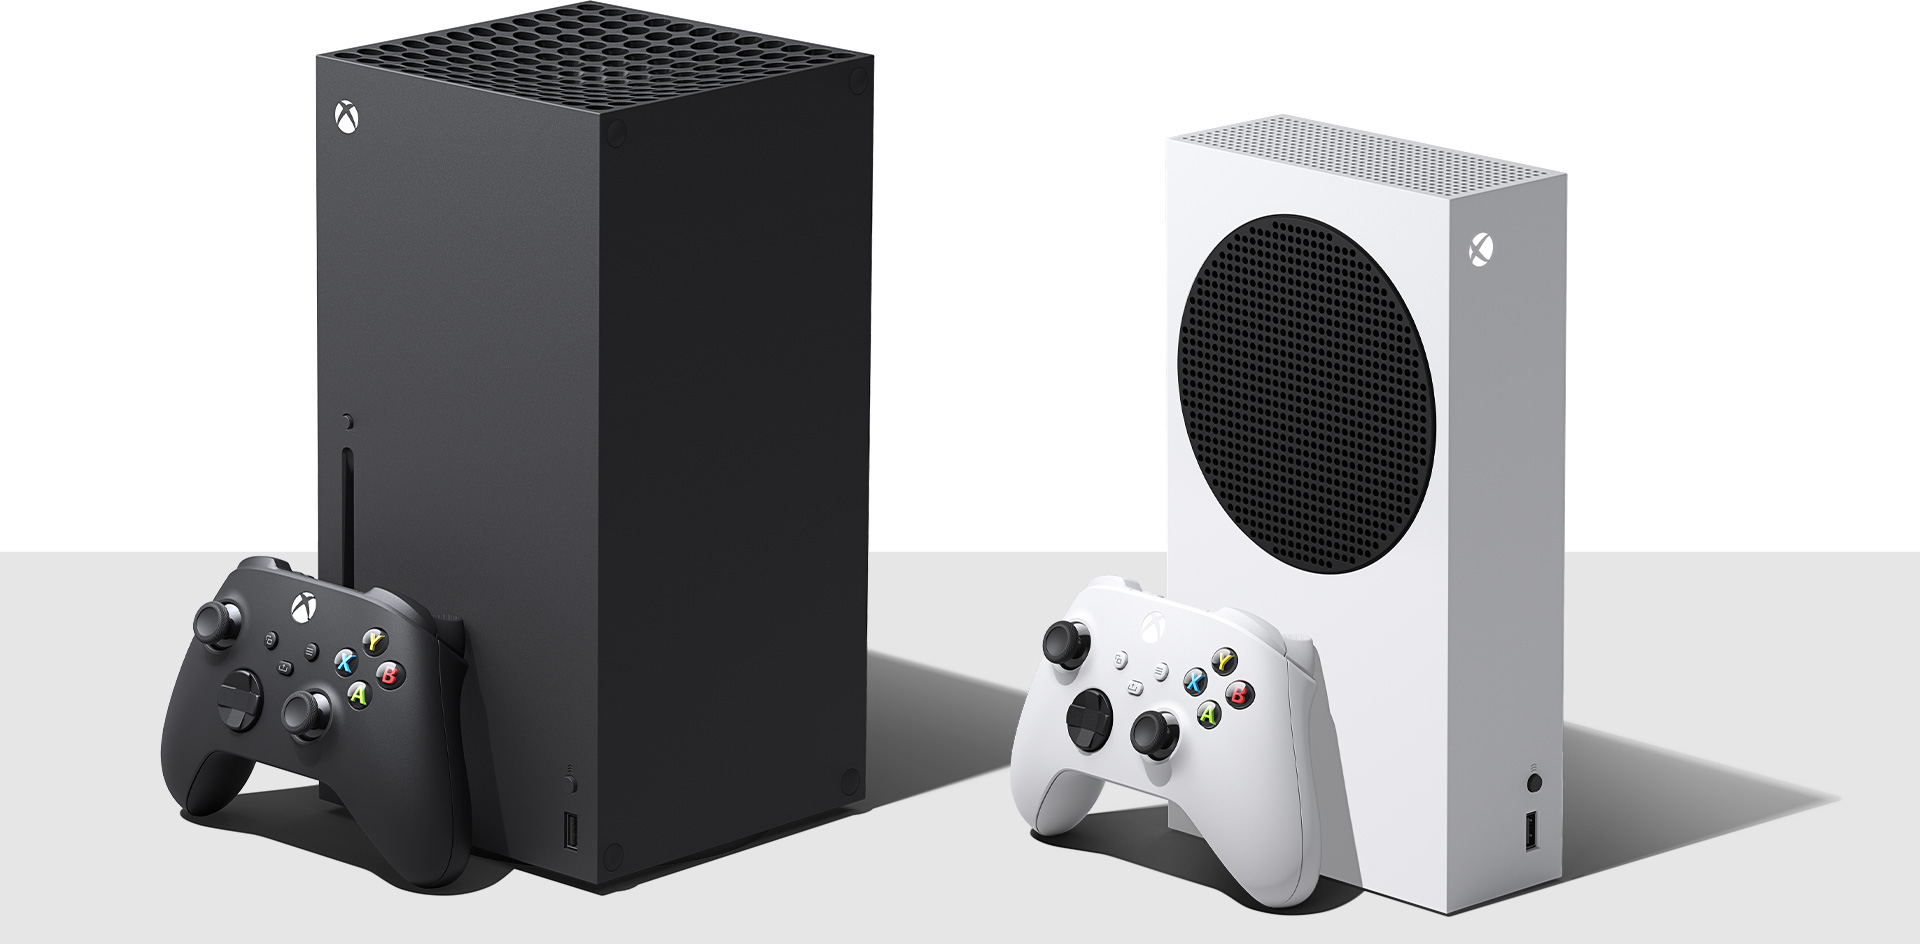 Get 24% off an Xbox One S 1TB all-digital console and disc-free